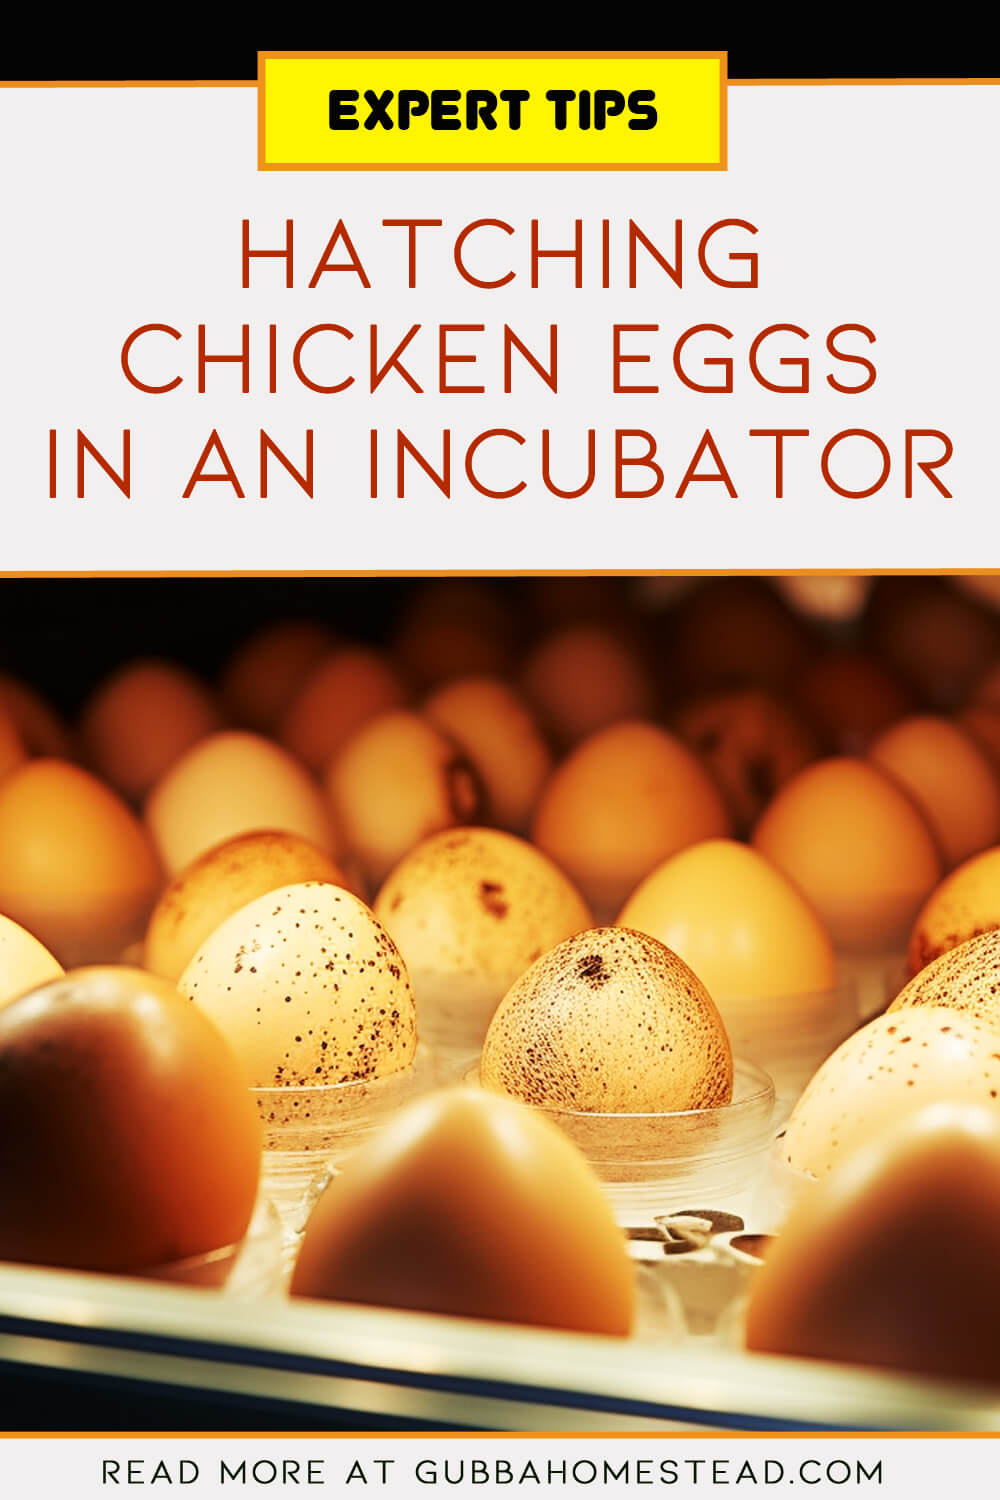 Hatching Chicken Eggs in an Incubator: Expert Tips